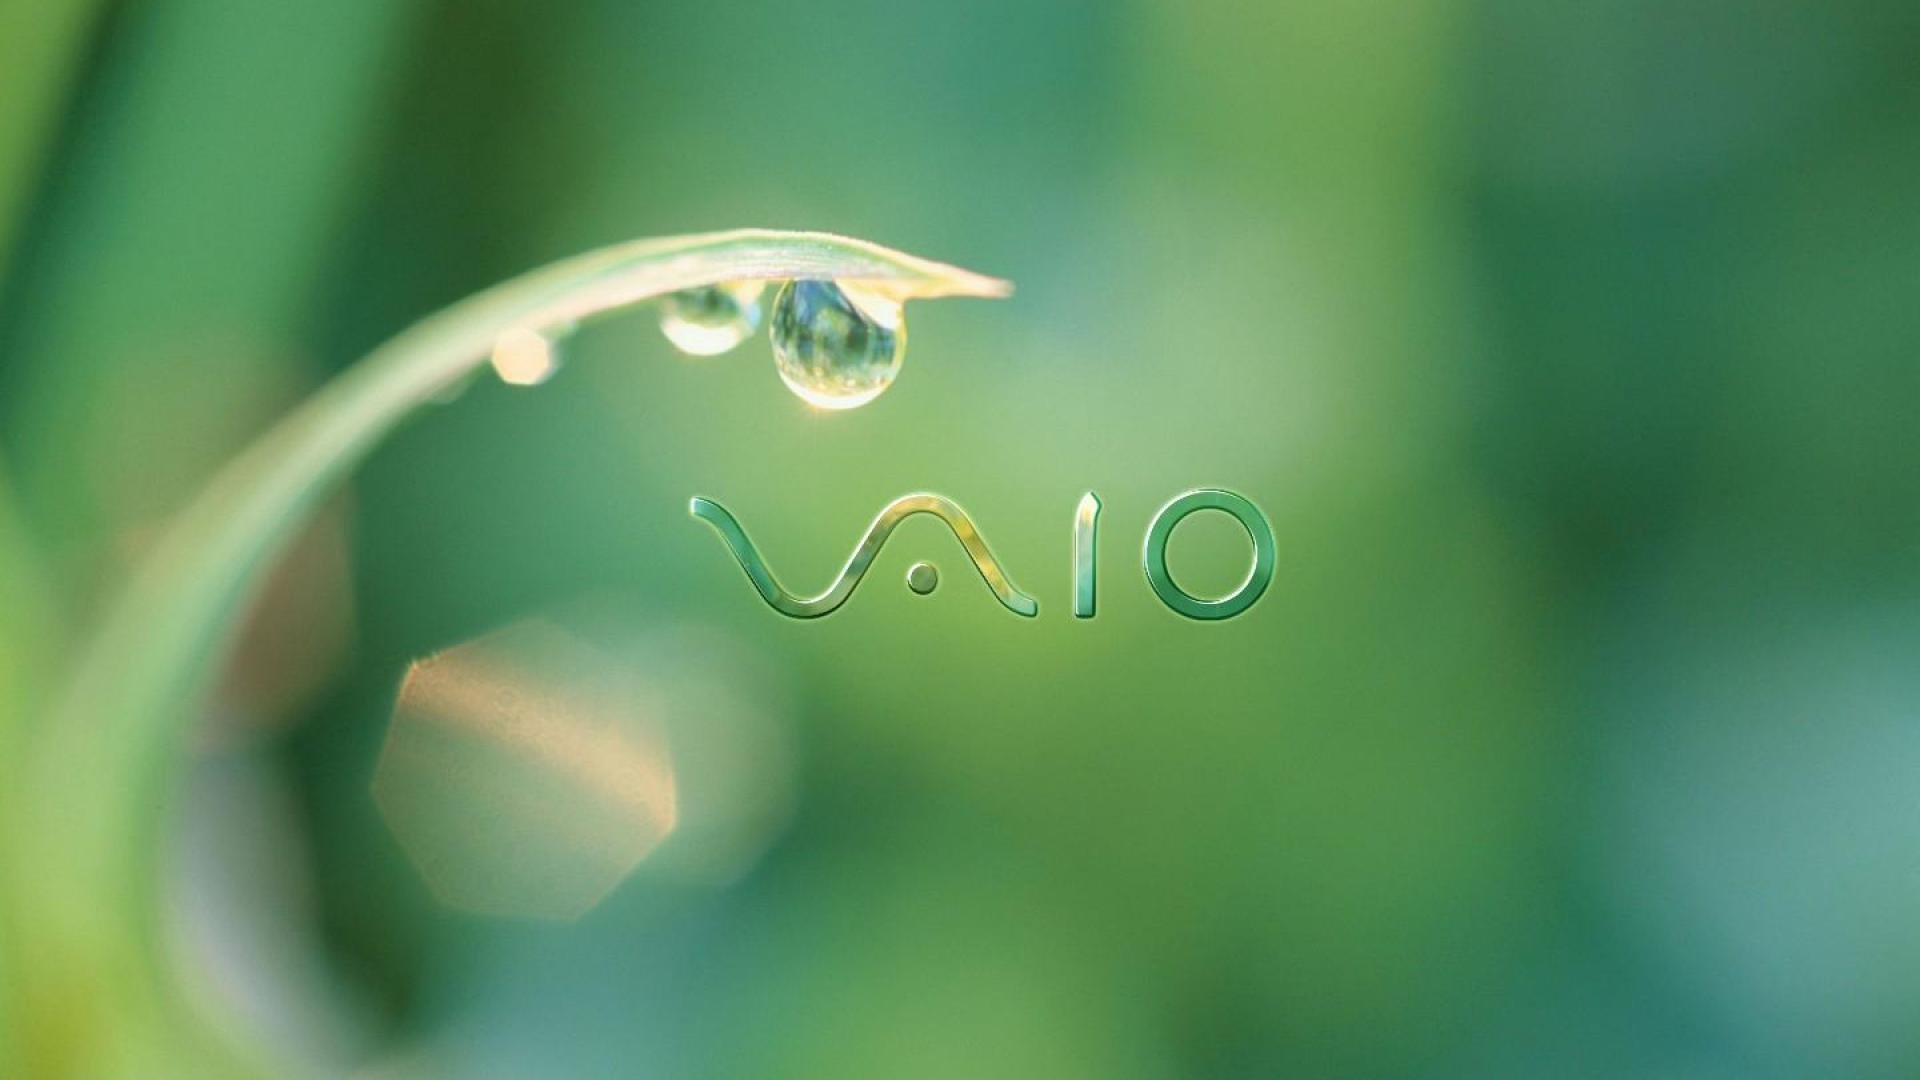 sony, Vaio, Computer Wallpapers HD / Desktop and Mobile Backgrounds